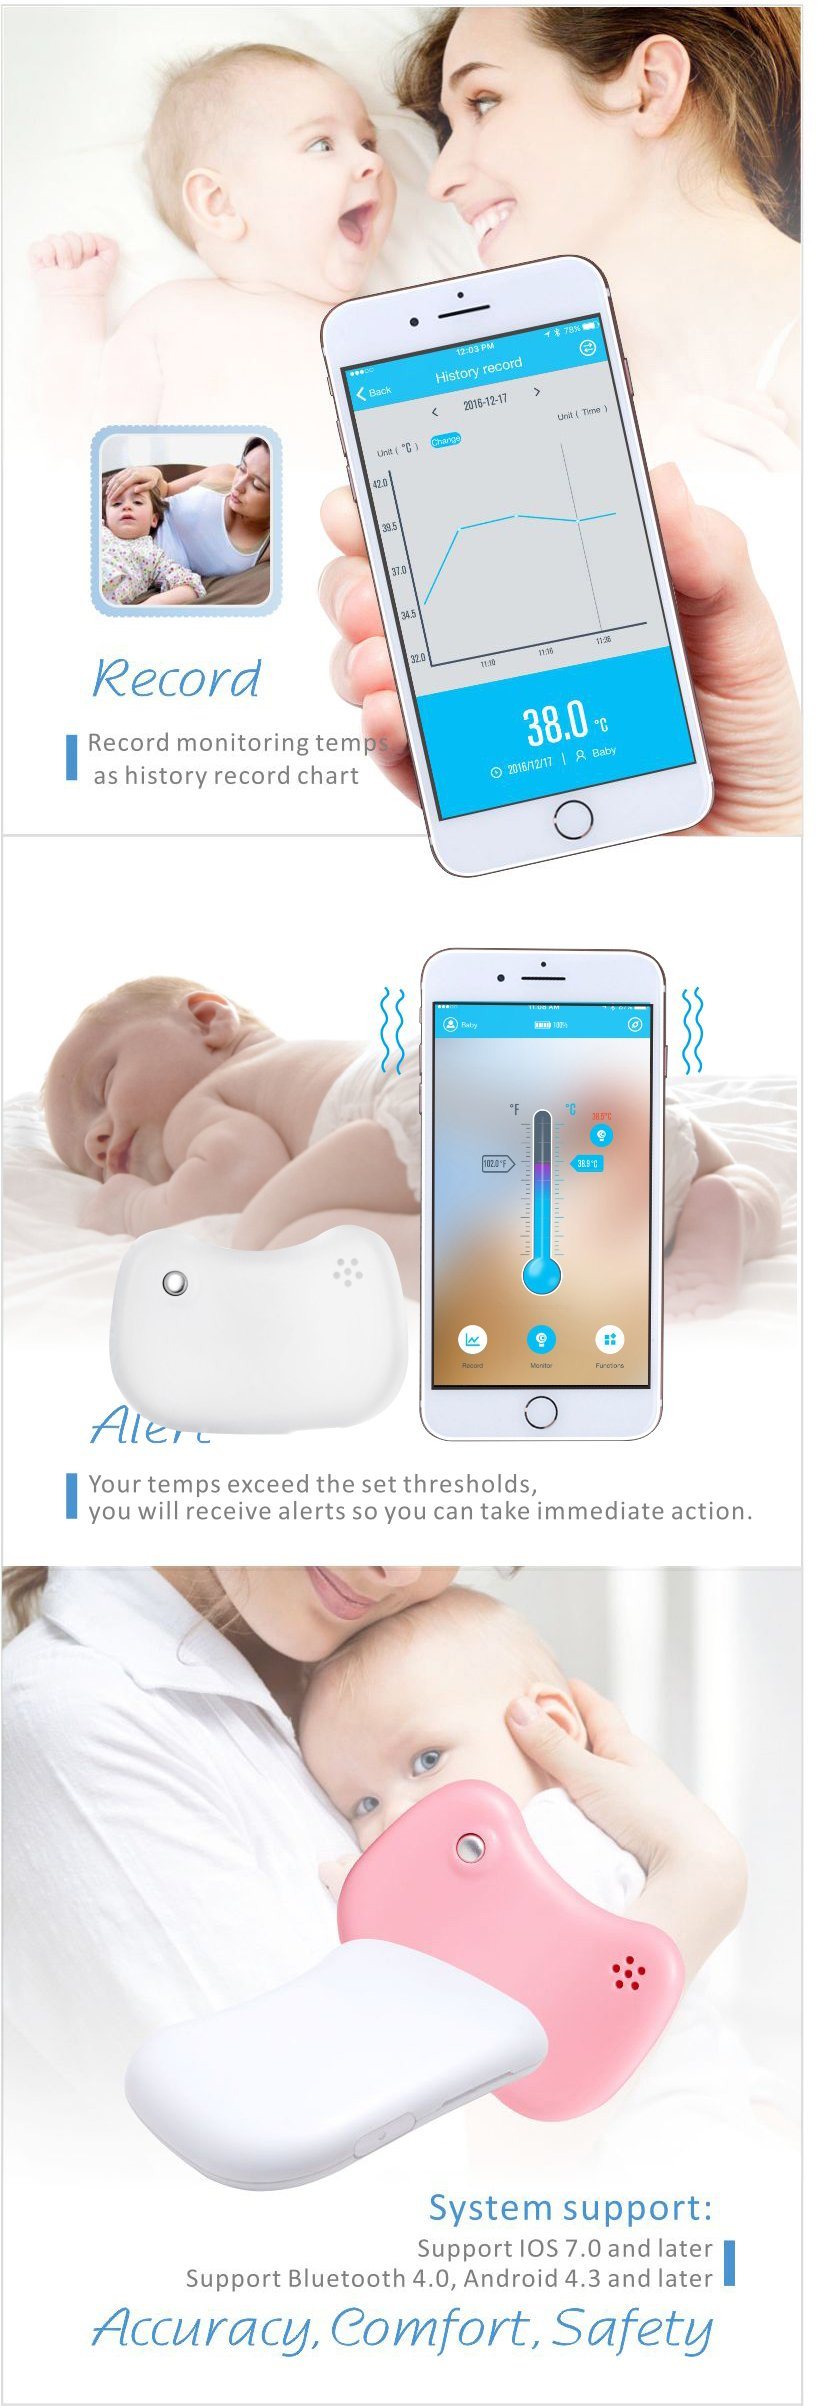 Baby Handheld Portable Fast Digital Fever Thermometer